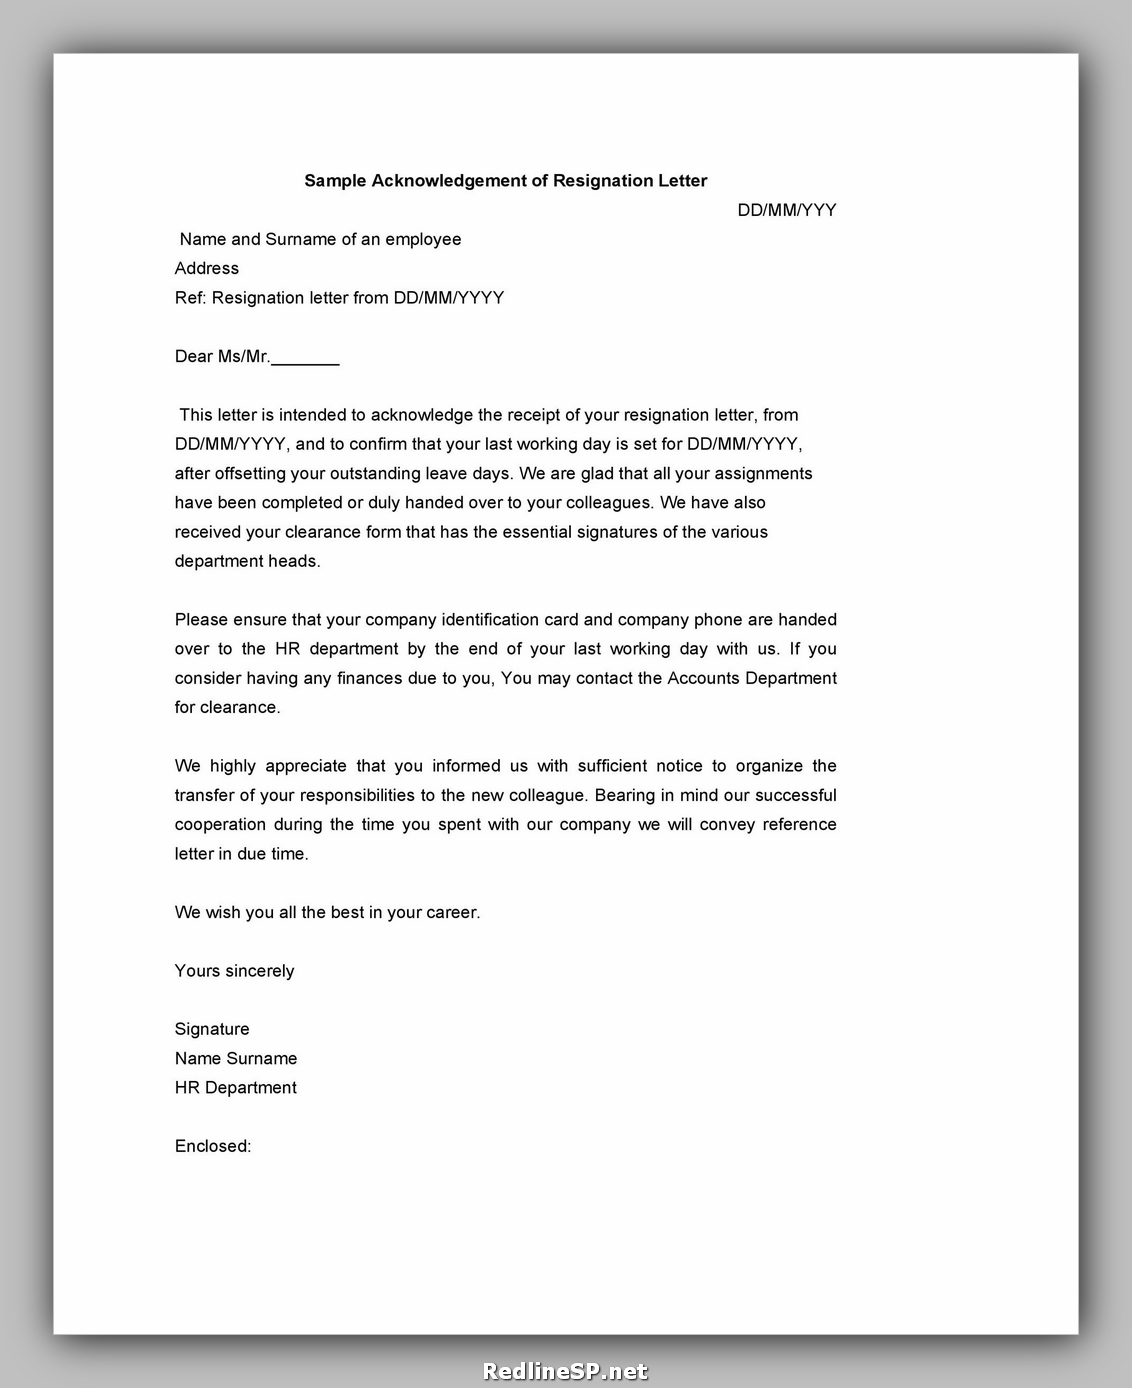 Acknowledgement Letter Template